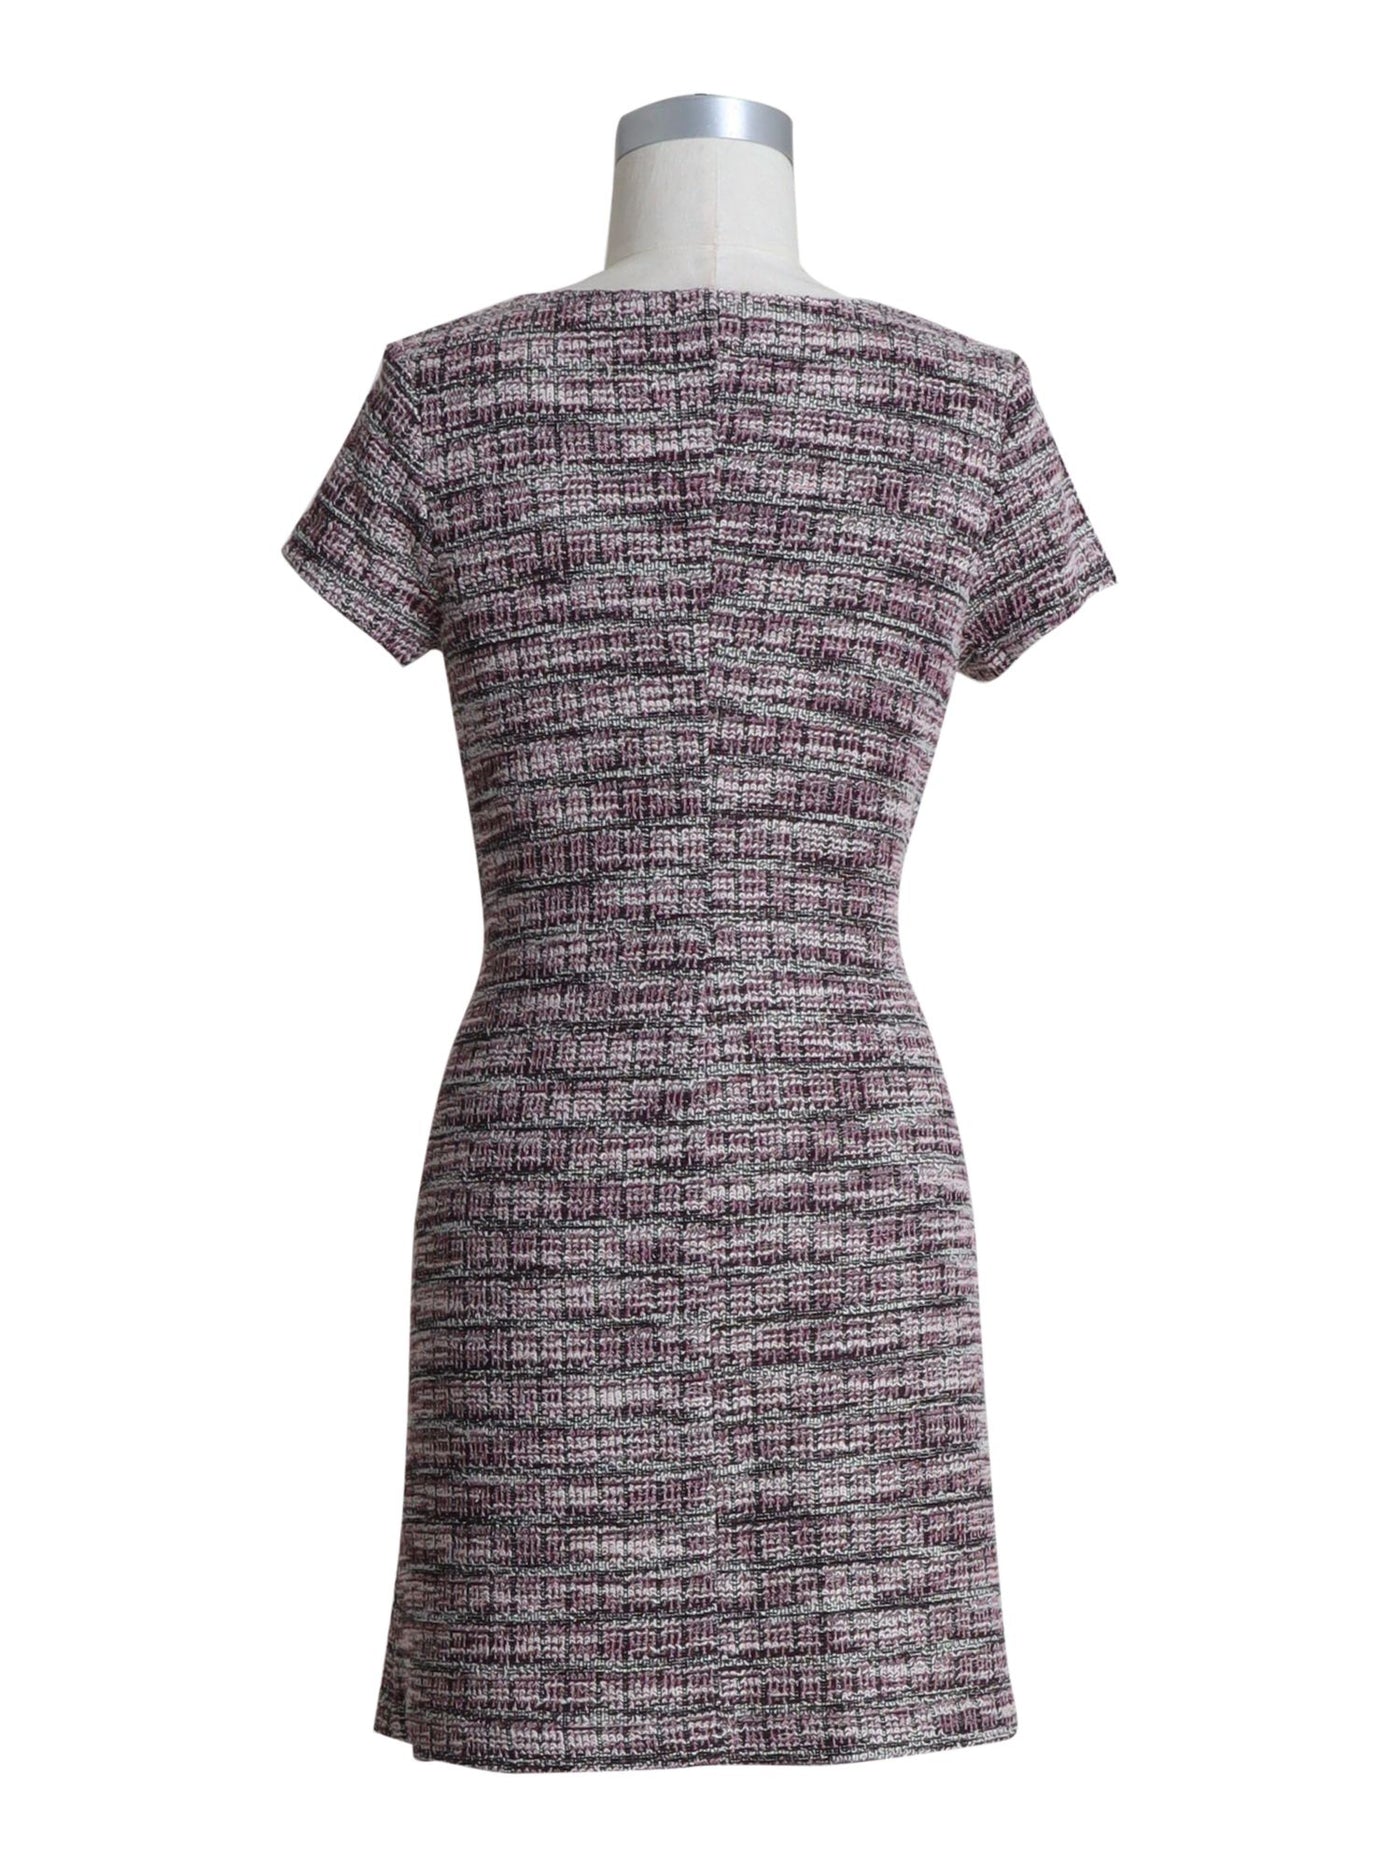 CONNECTED APPAREL Womens Stretch Textured Welt-pocket-detail Tweed Short Sleeve Round Neck Above The Knee Wear To Work Sheath Dress